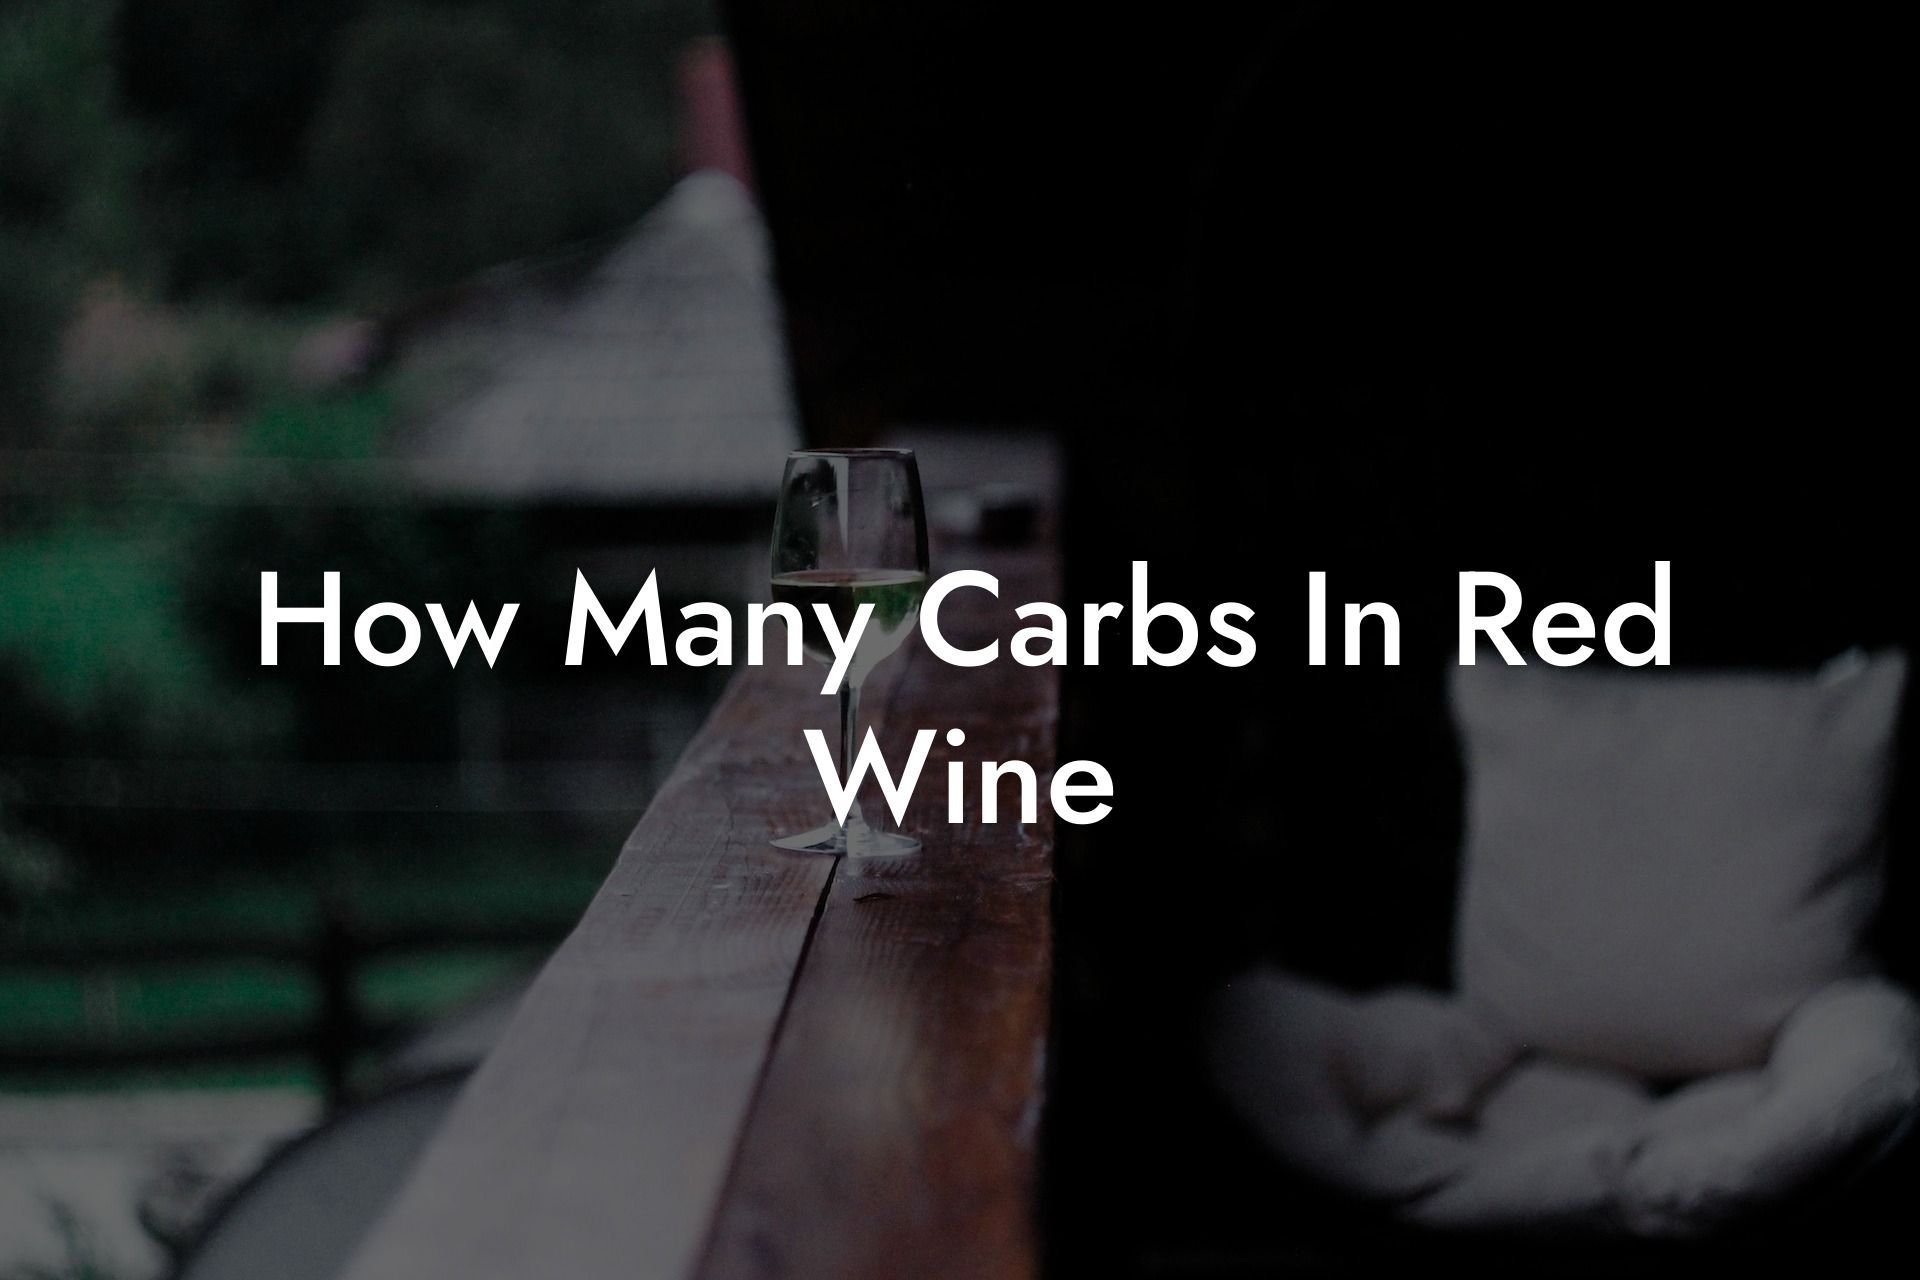 How Many Carbs In Red Wine